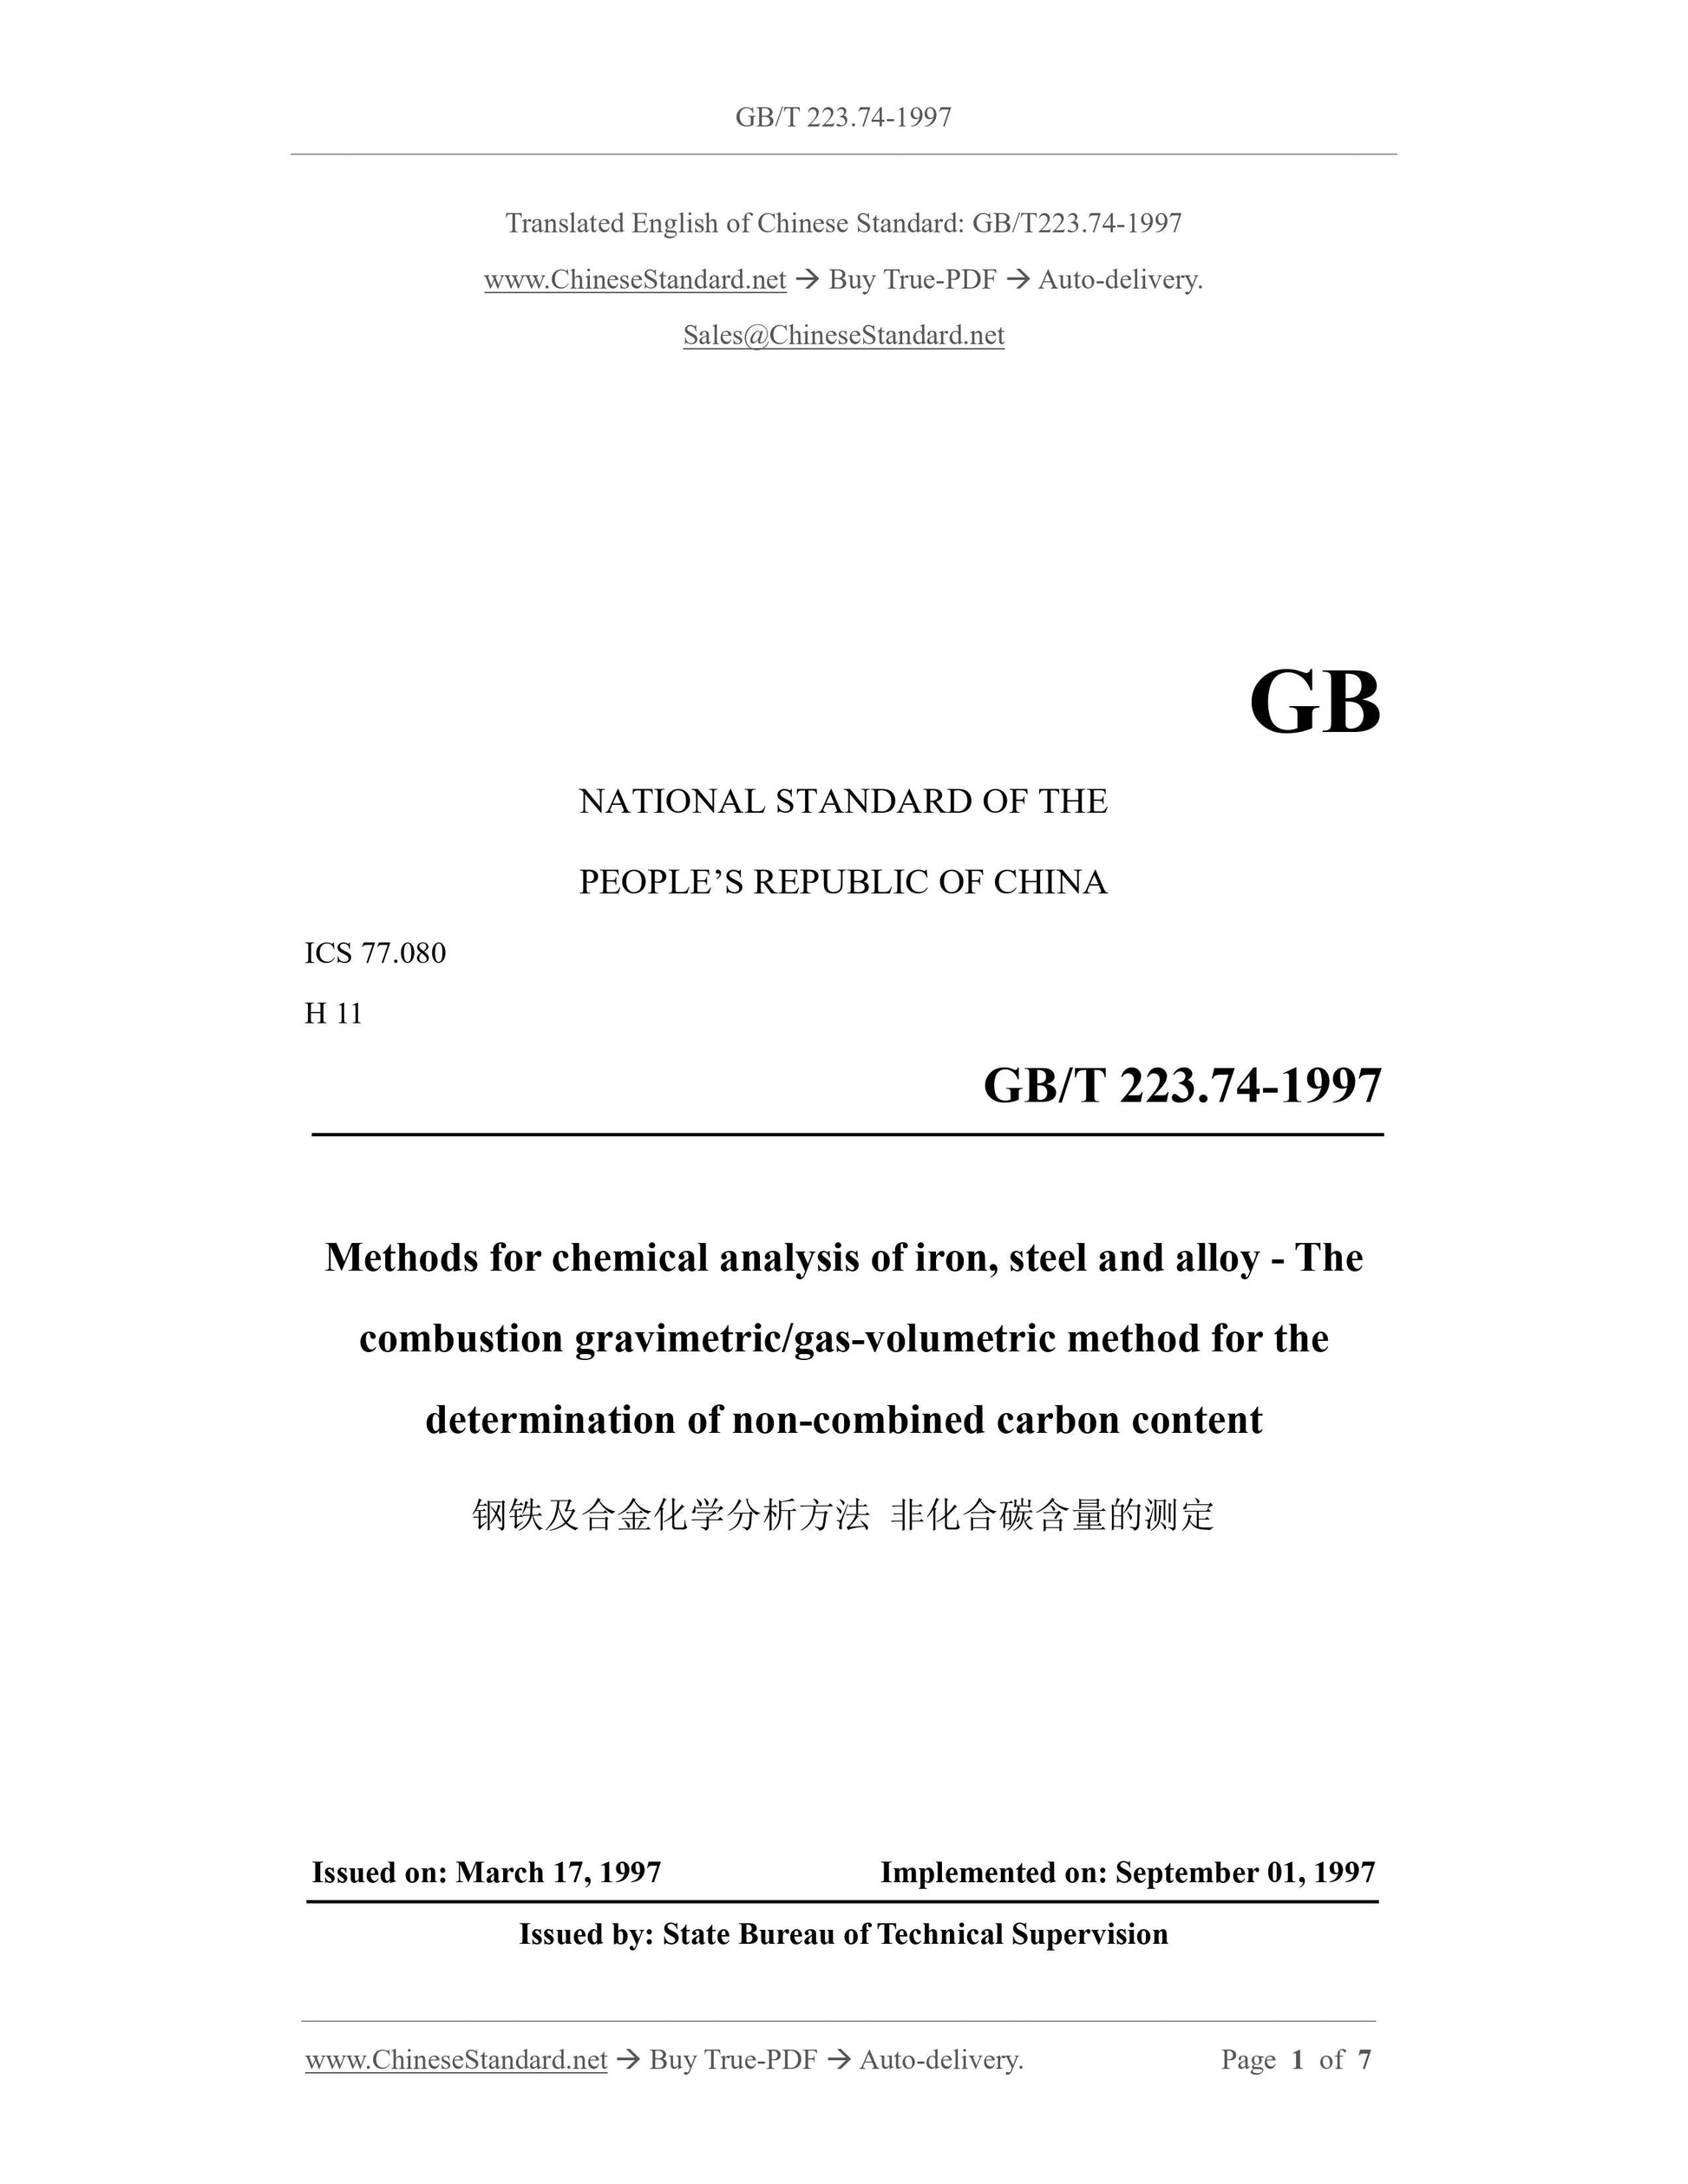 GB/T 223.74-1997 Page 1